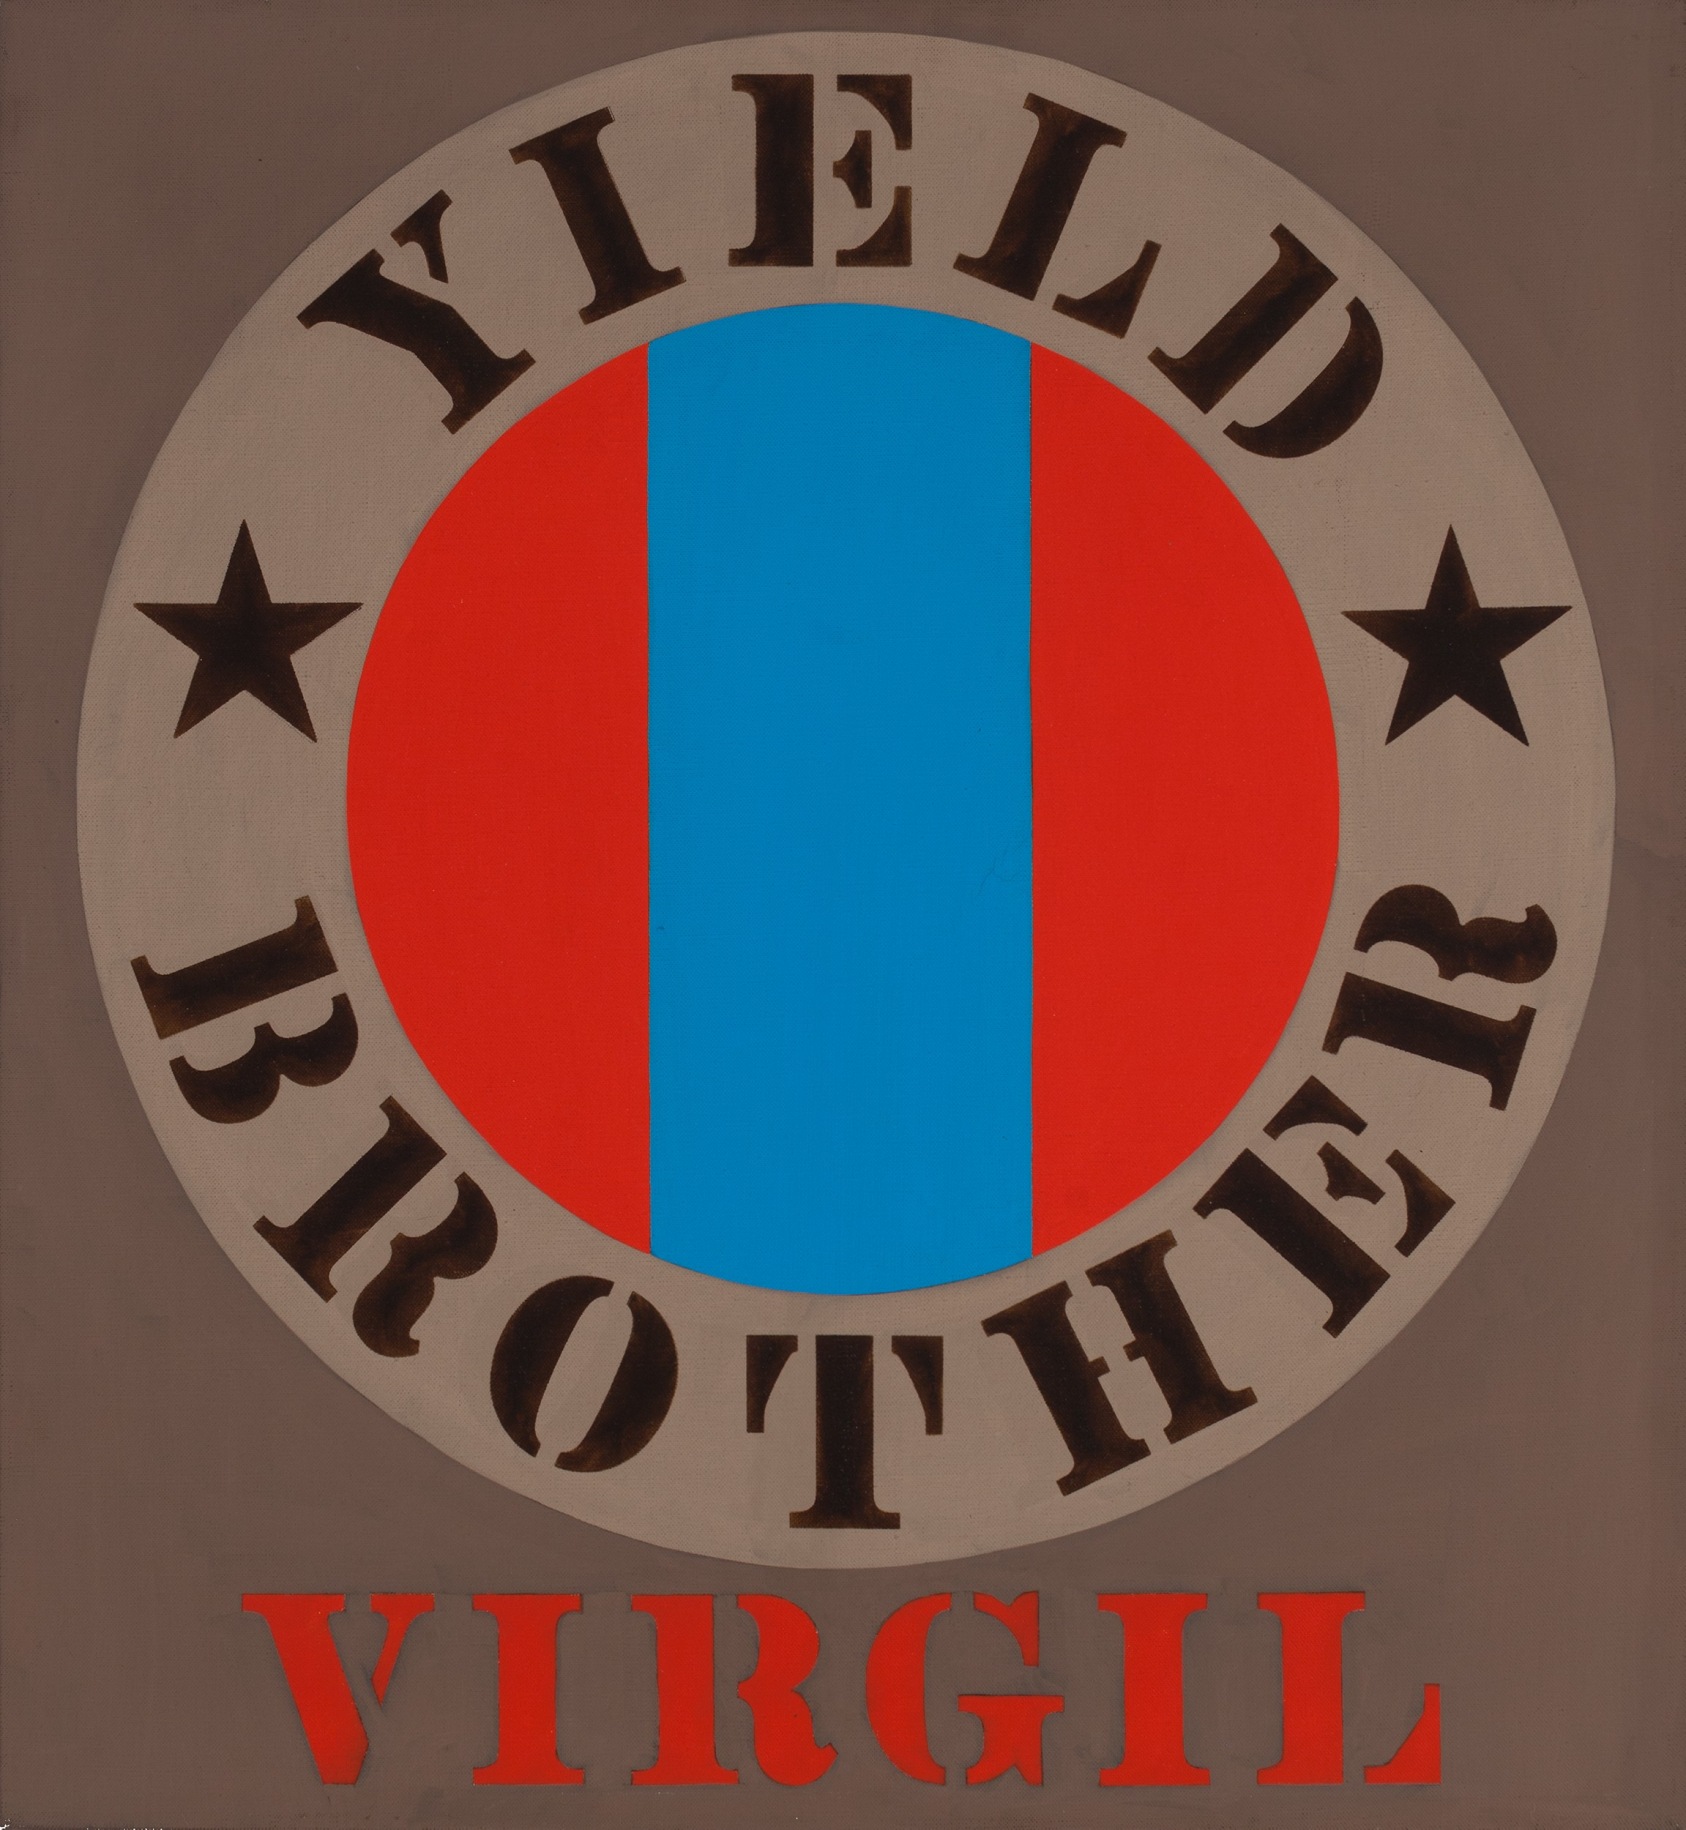 Yield Brother Virgil, a 24 by 22 inch brown painting with Virgil painted in red stenciled letters across the bottom center of the canvas. Above it is a red circle with a blue vertical band, surrounded by a lighter brown ring with the words &quot;Yield&quot; and &quot;Brother&quot; painted in a black stencil, and a black star in between the words.